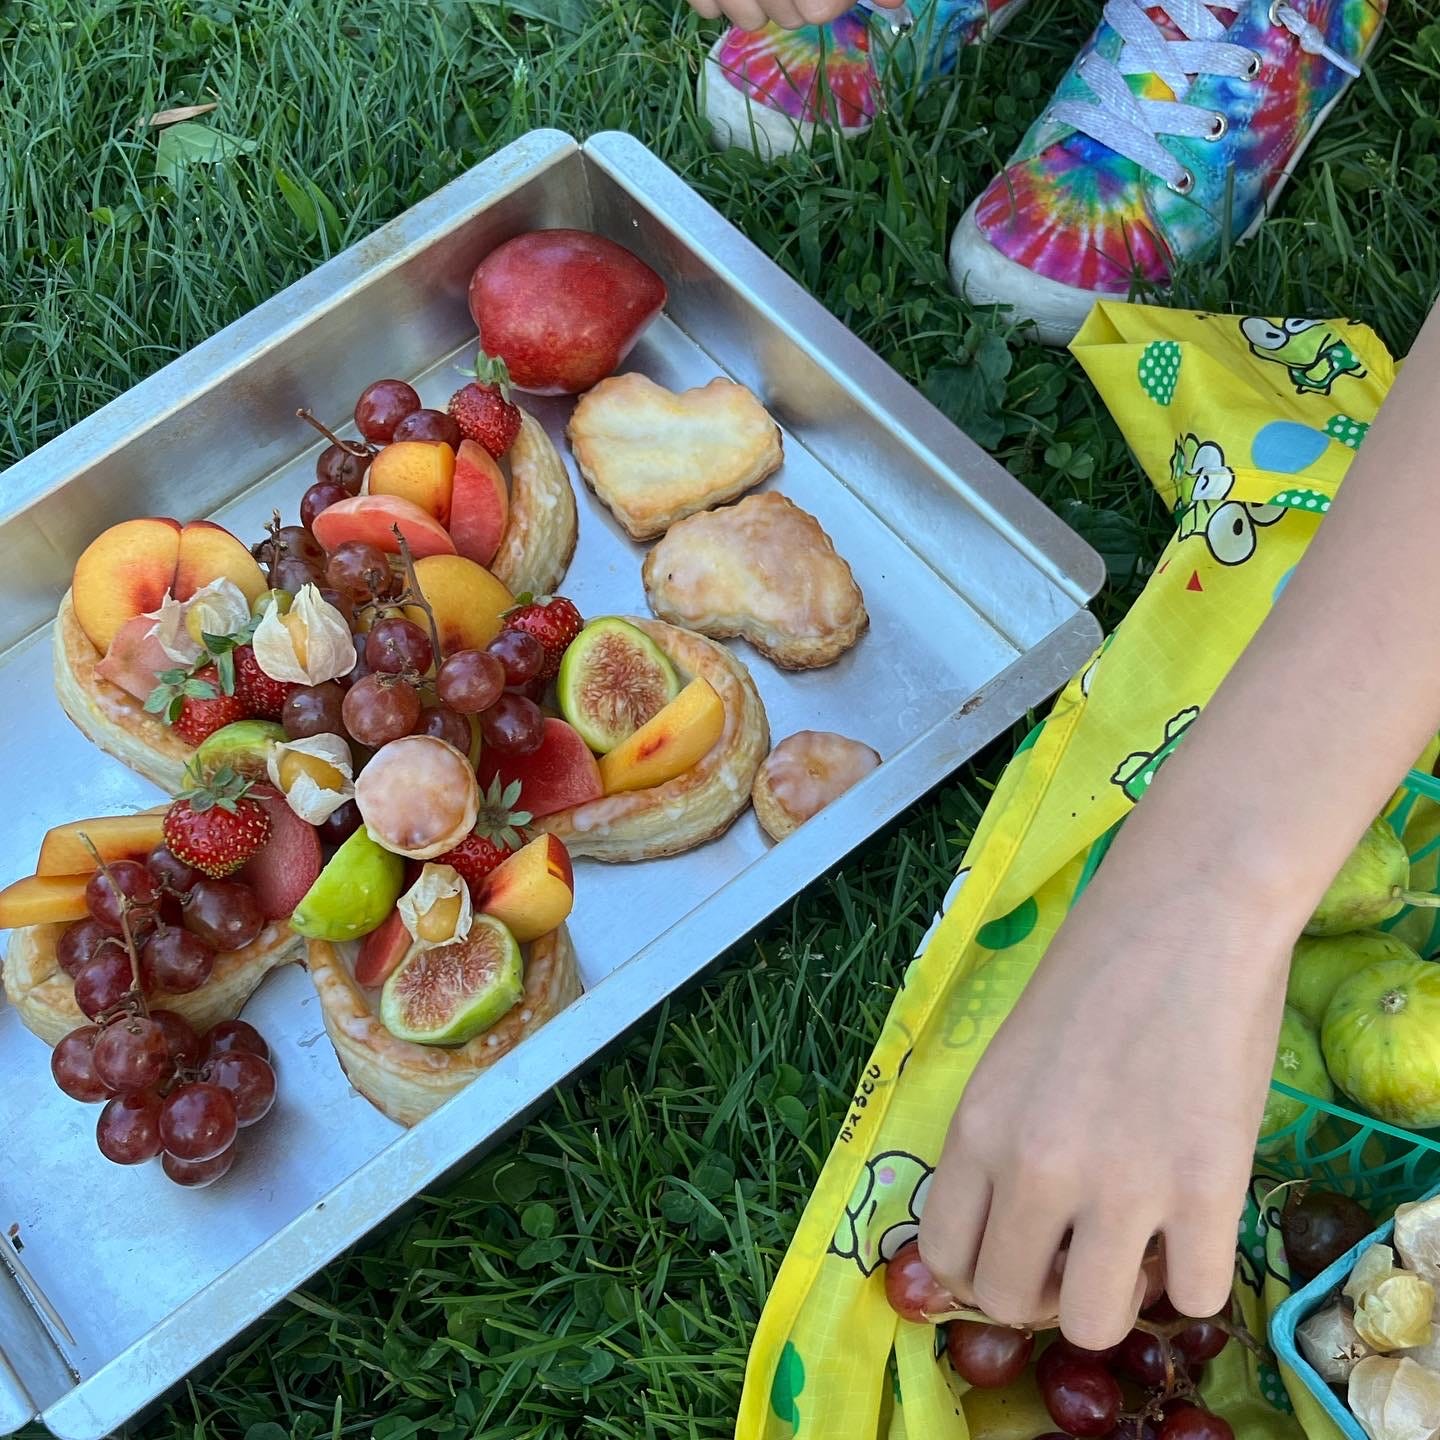 A fruit tart placed on the grass at a picnic